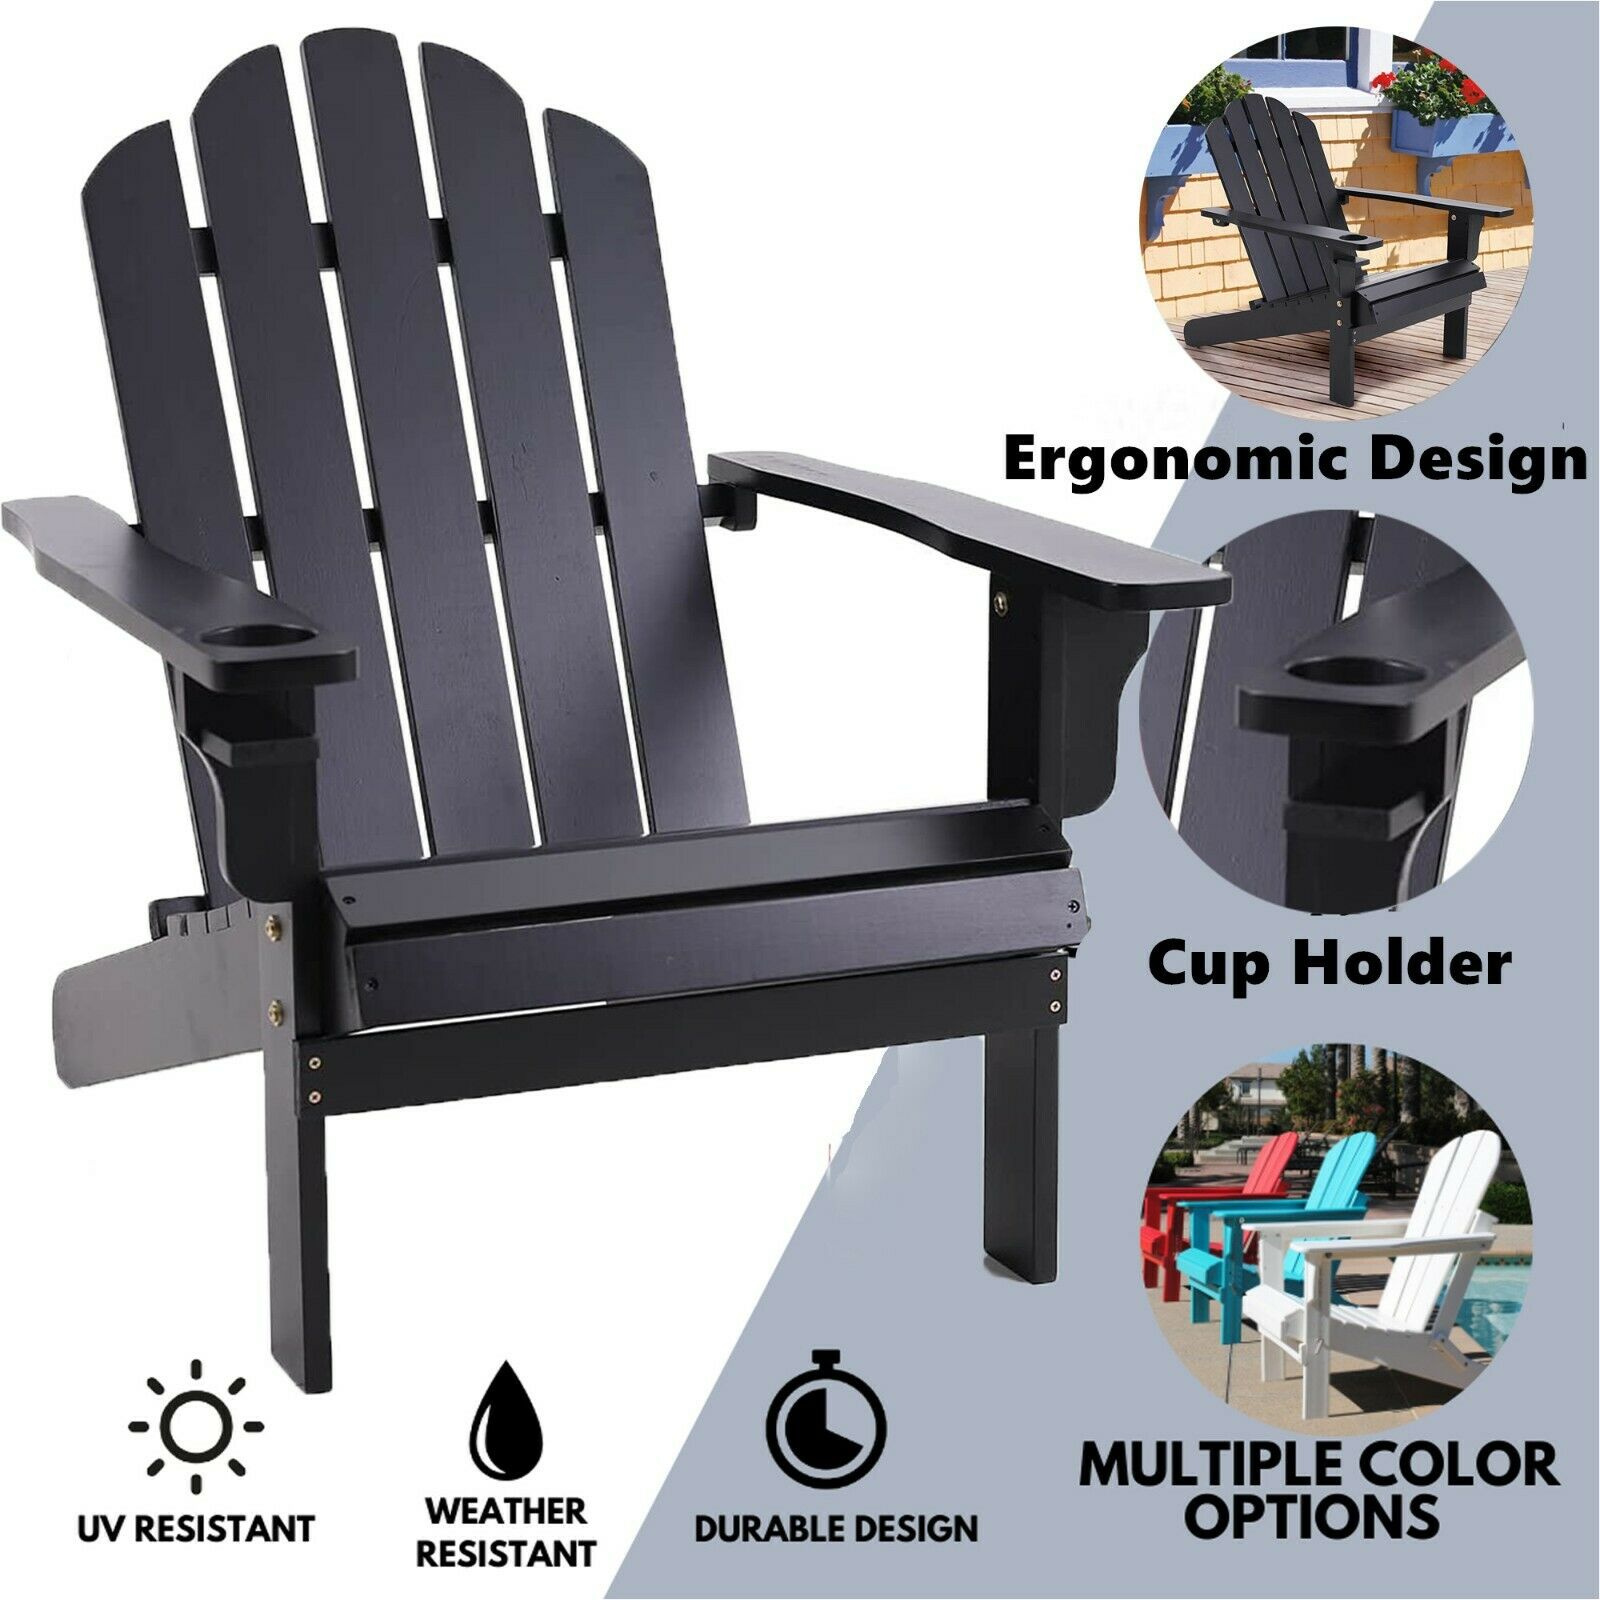 Wood Patio Chair Outdoor Weather Resistant Wooden Adirondack Chairs W/Cup Holder